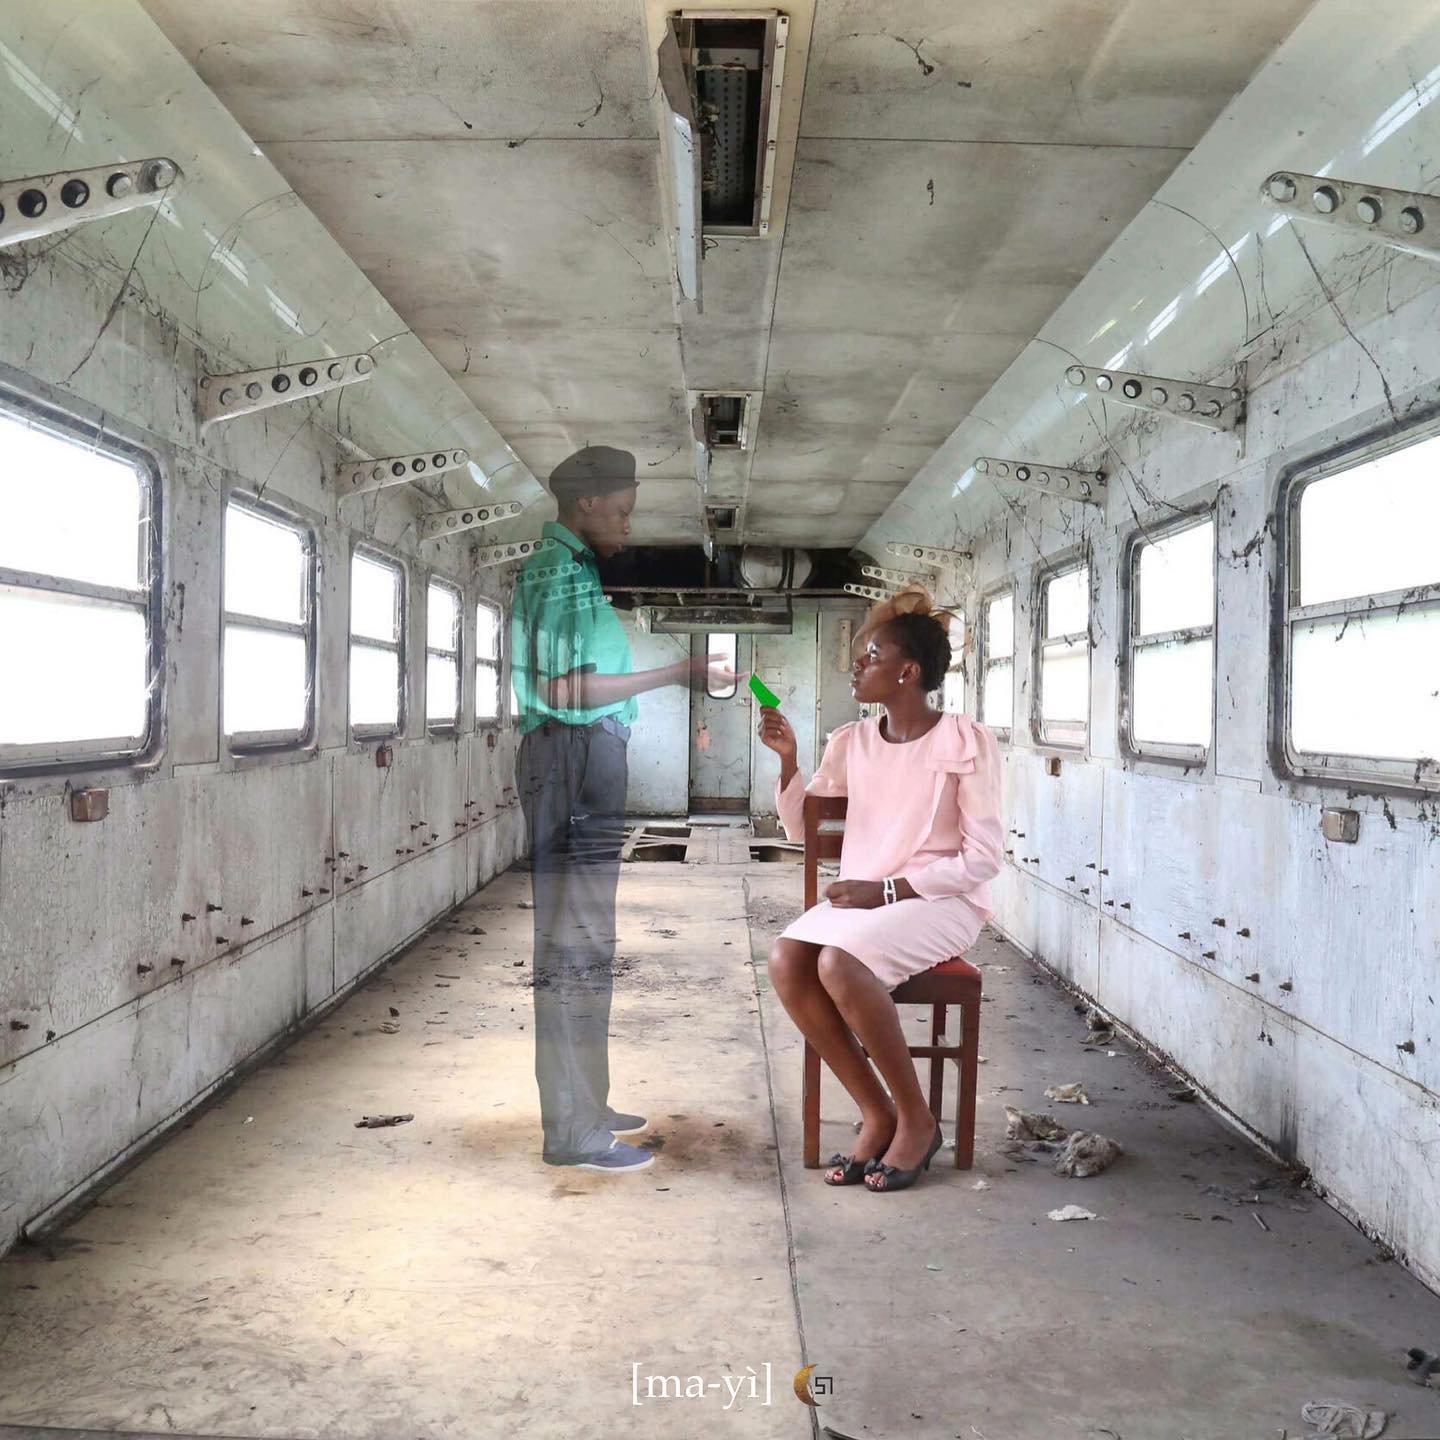 [WE LOVE] ✨ Imaginary Trips, Gosette LUBONDO&rsquo;s (b.1993) 🇨🇩 iconic two phases series (2016,2018) in which the talented photographer takes us on a journey of abandoned places in Congo.

In phase 1, she stages herself in abandoned railways carri